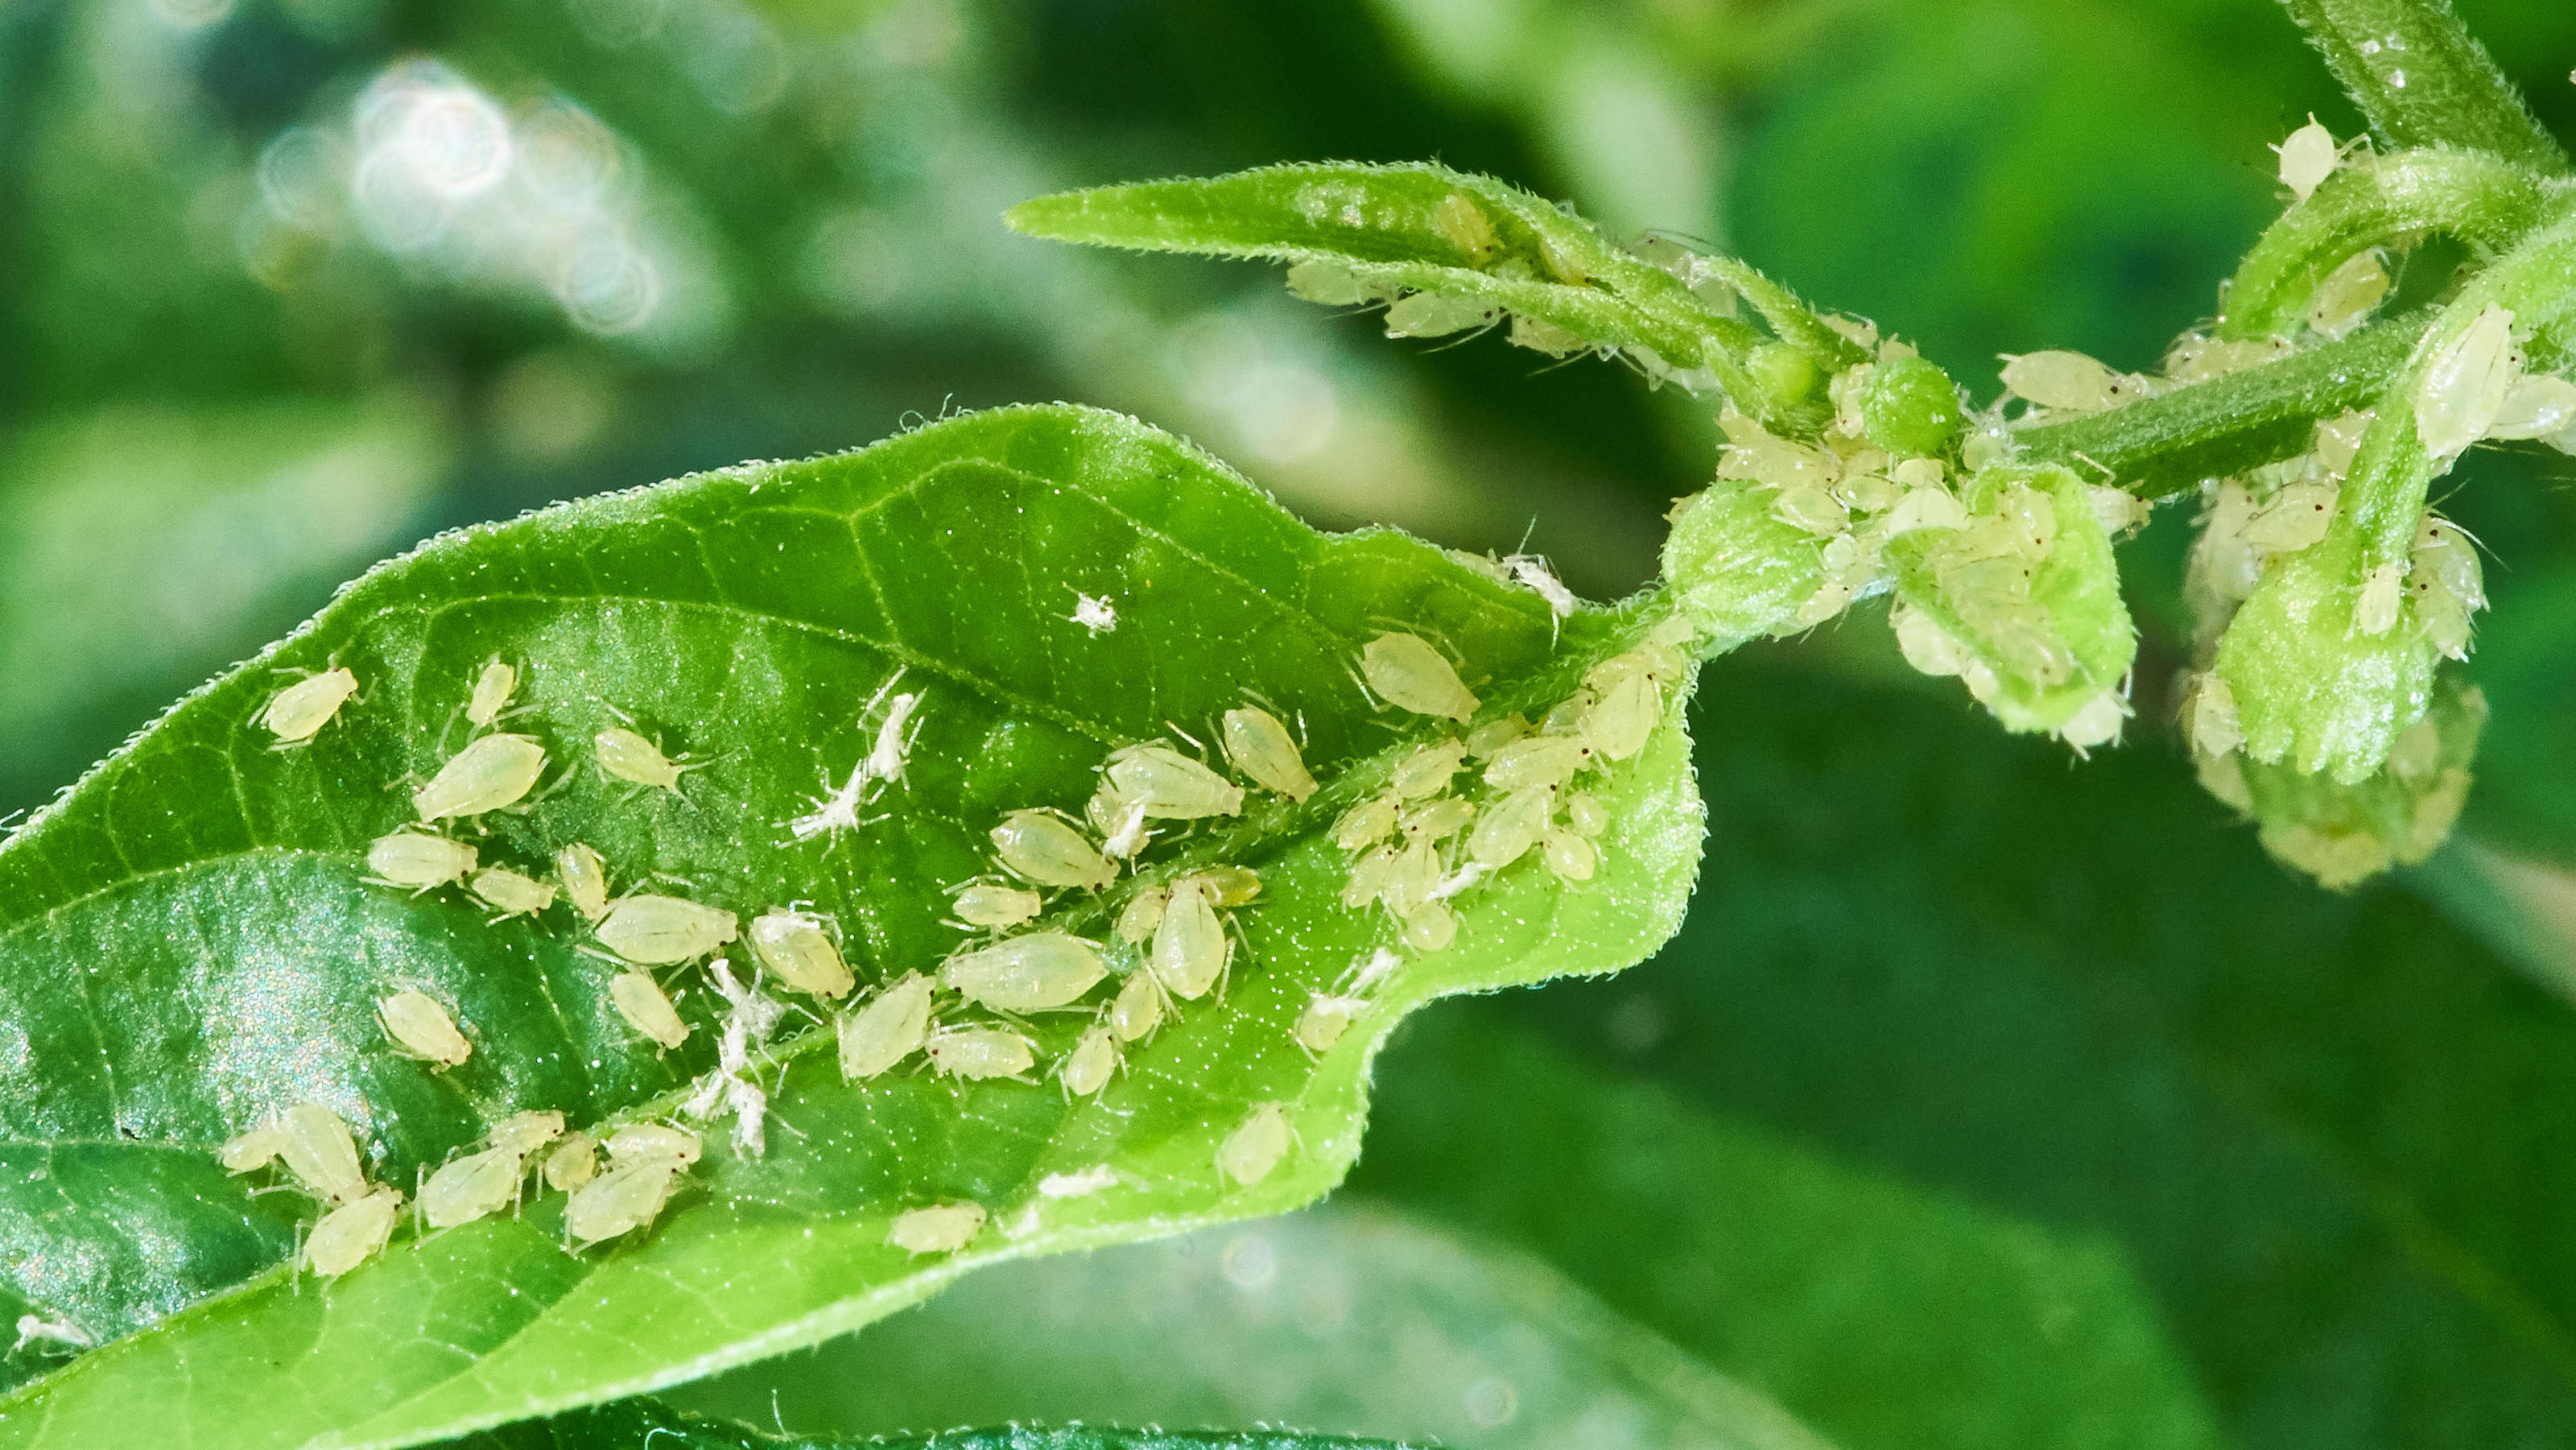 How to get rid of aphids: tips to prevent them from ruining your plants |  Gardeningetc